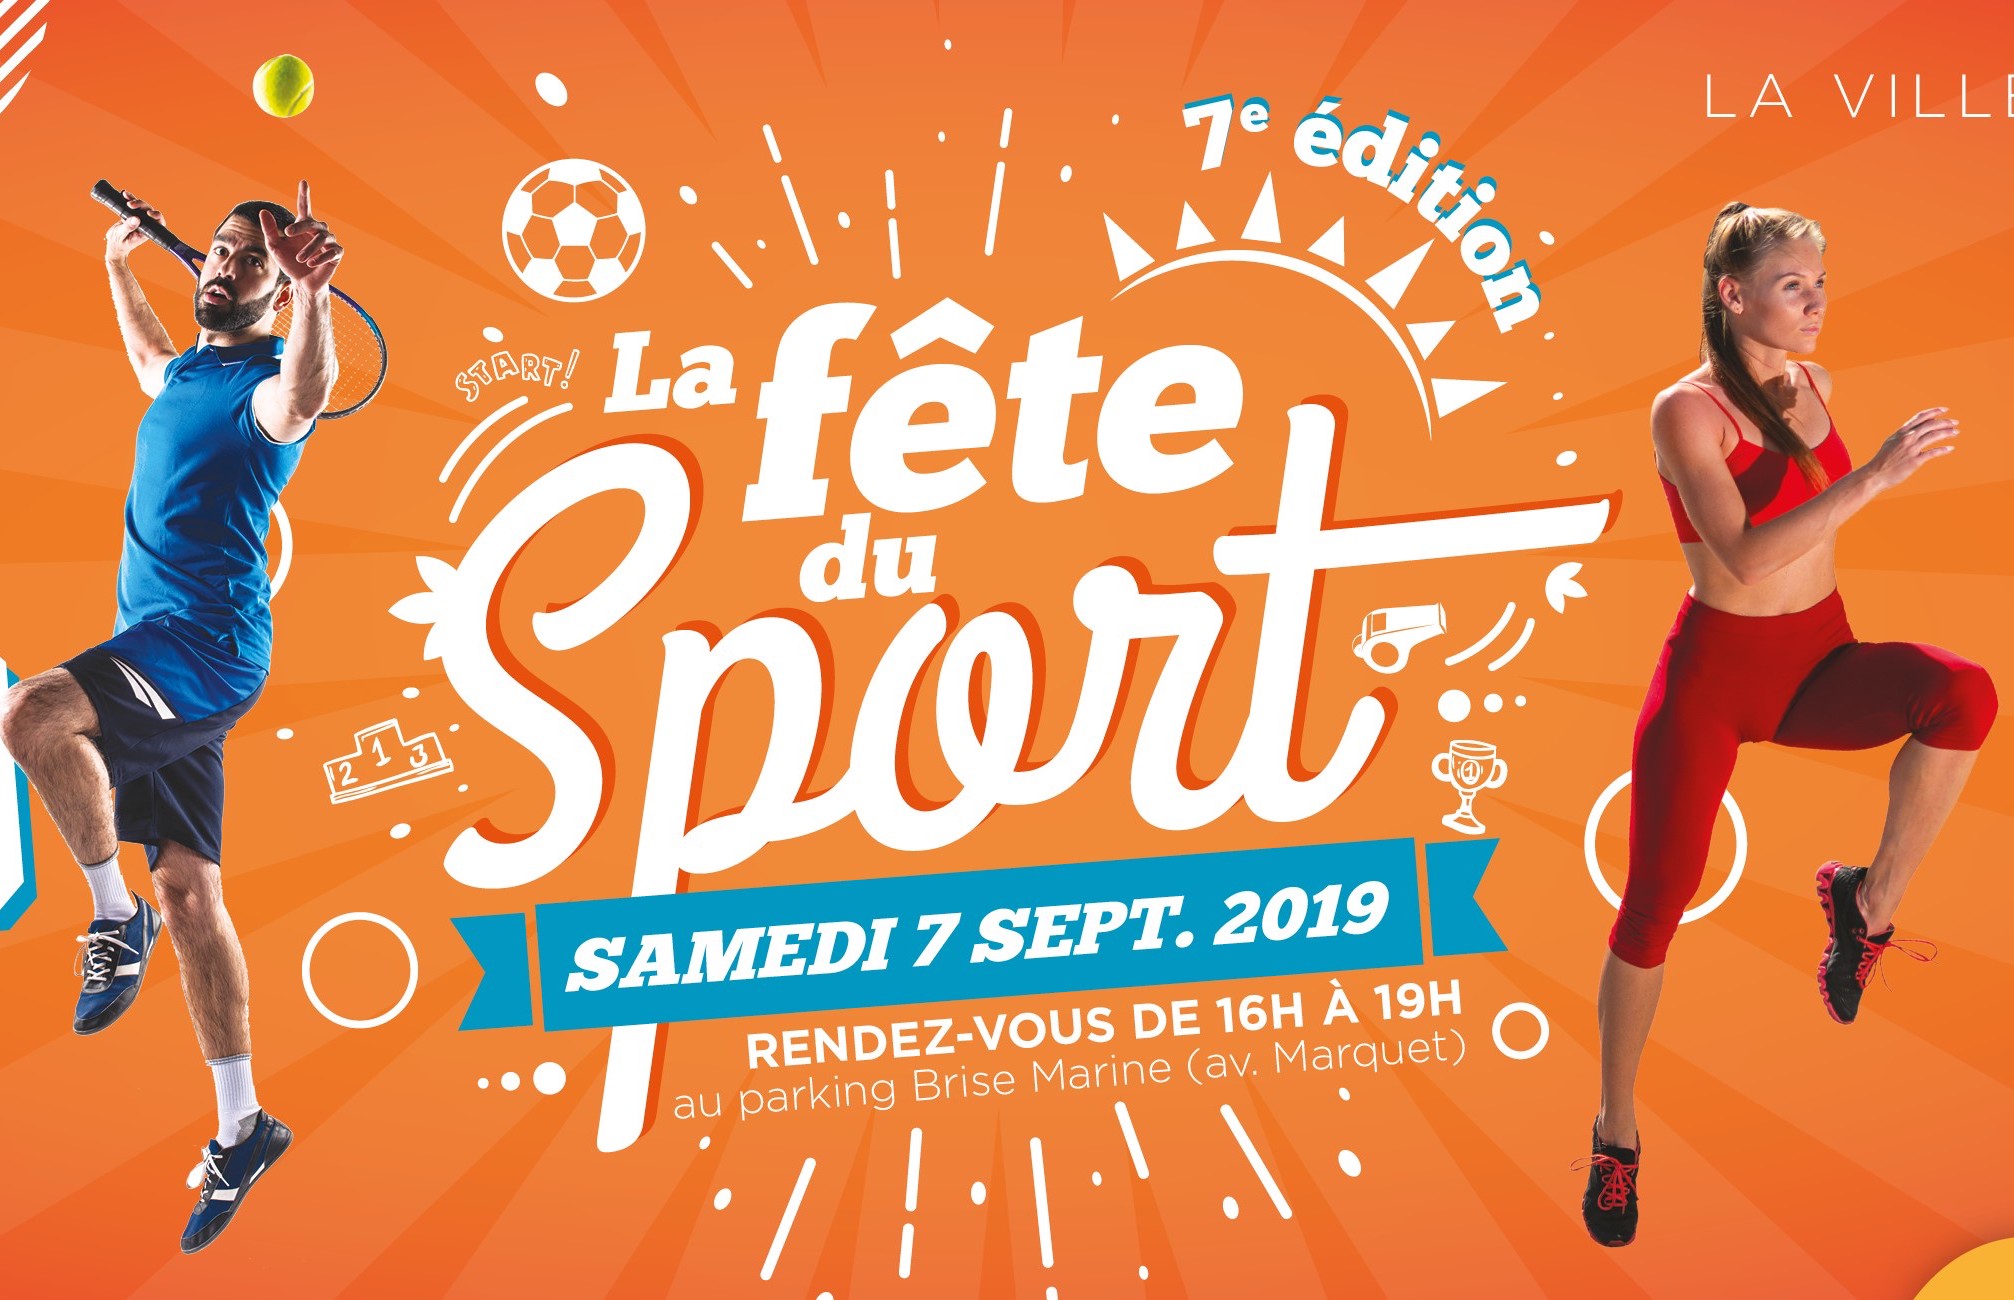 You are currently viewing Cap d’Ail Sport Party on Saturday September 7th from 4 pm to 7:30 pm